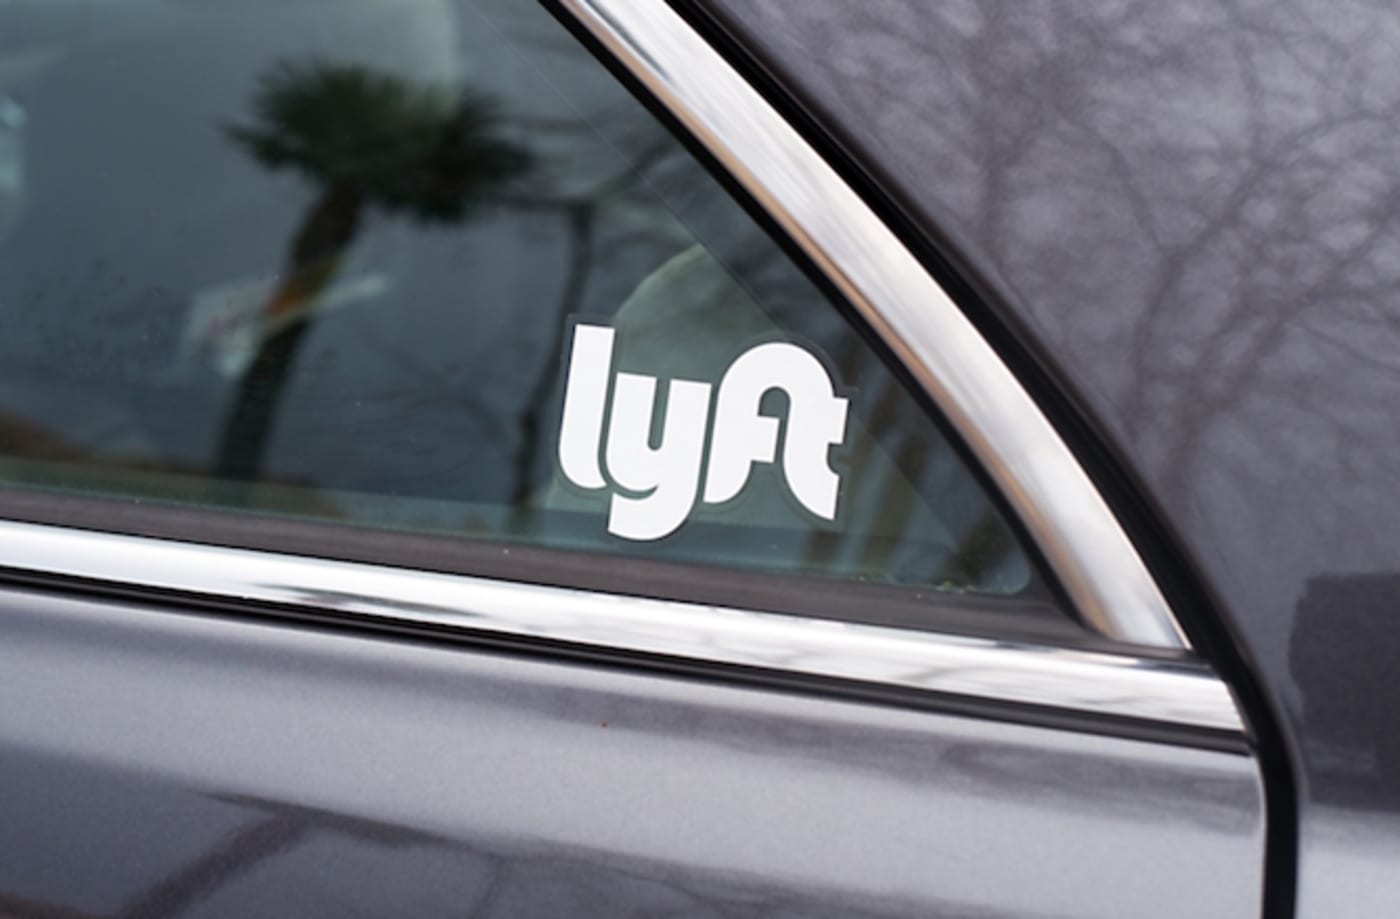 Close up of side window of a car used for the ridesharing service Lyft.